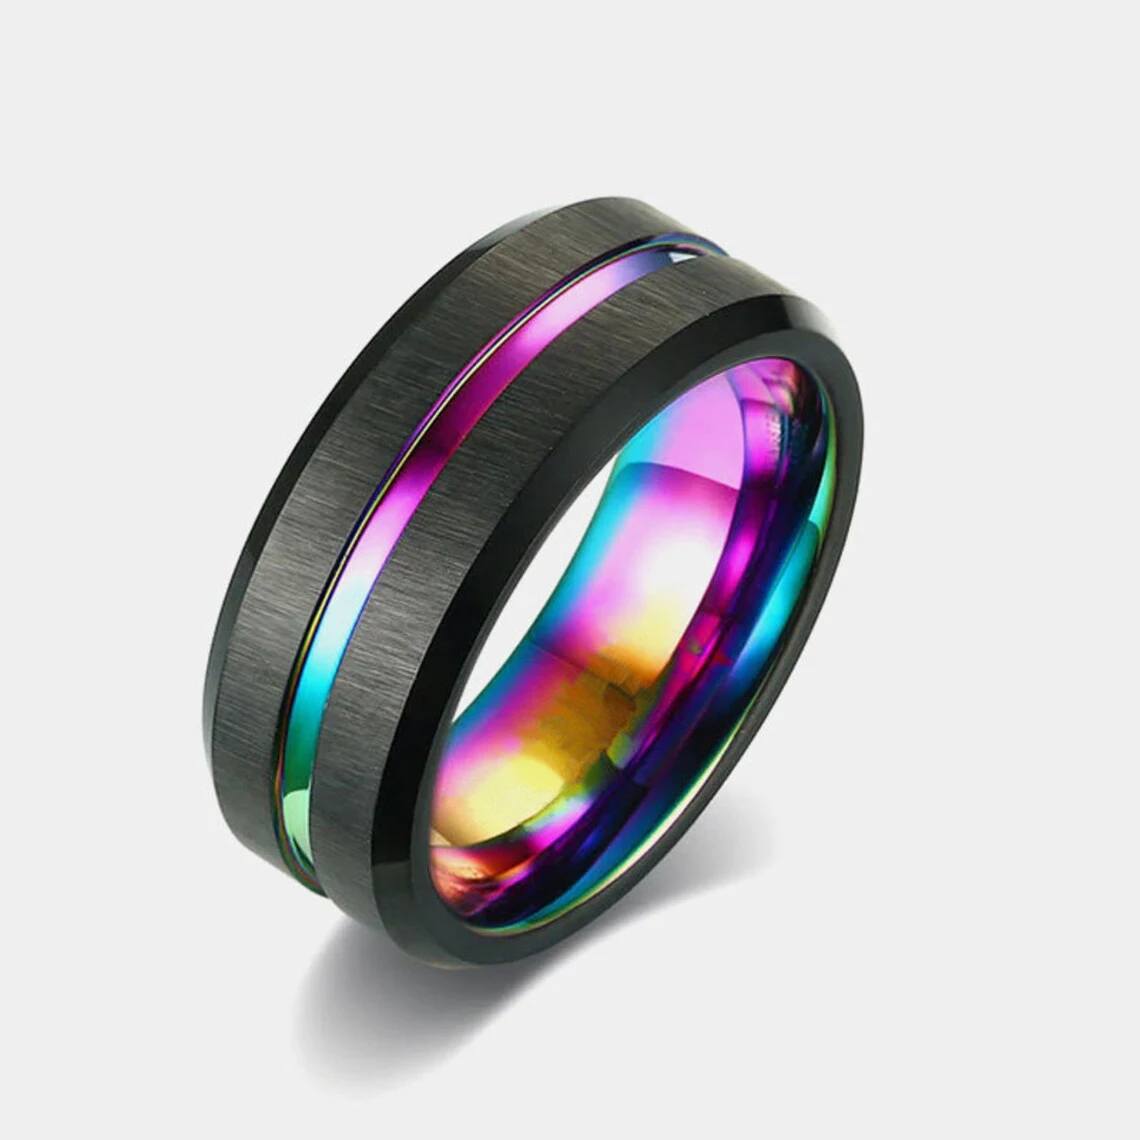 

Trendy 8mm Black Brushed Titanium Steel Ring For Men Rainbow Groove Beveled Edge Stainless Steel Engagement Ring Wedding Jewelry